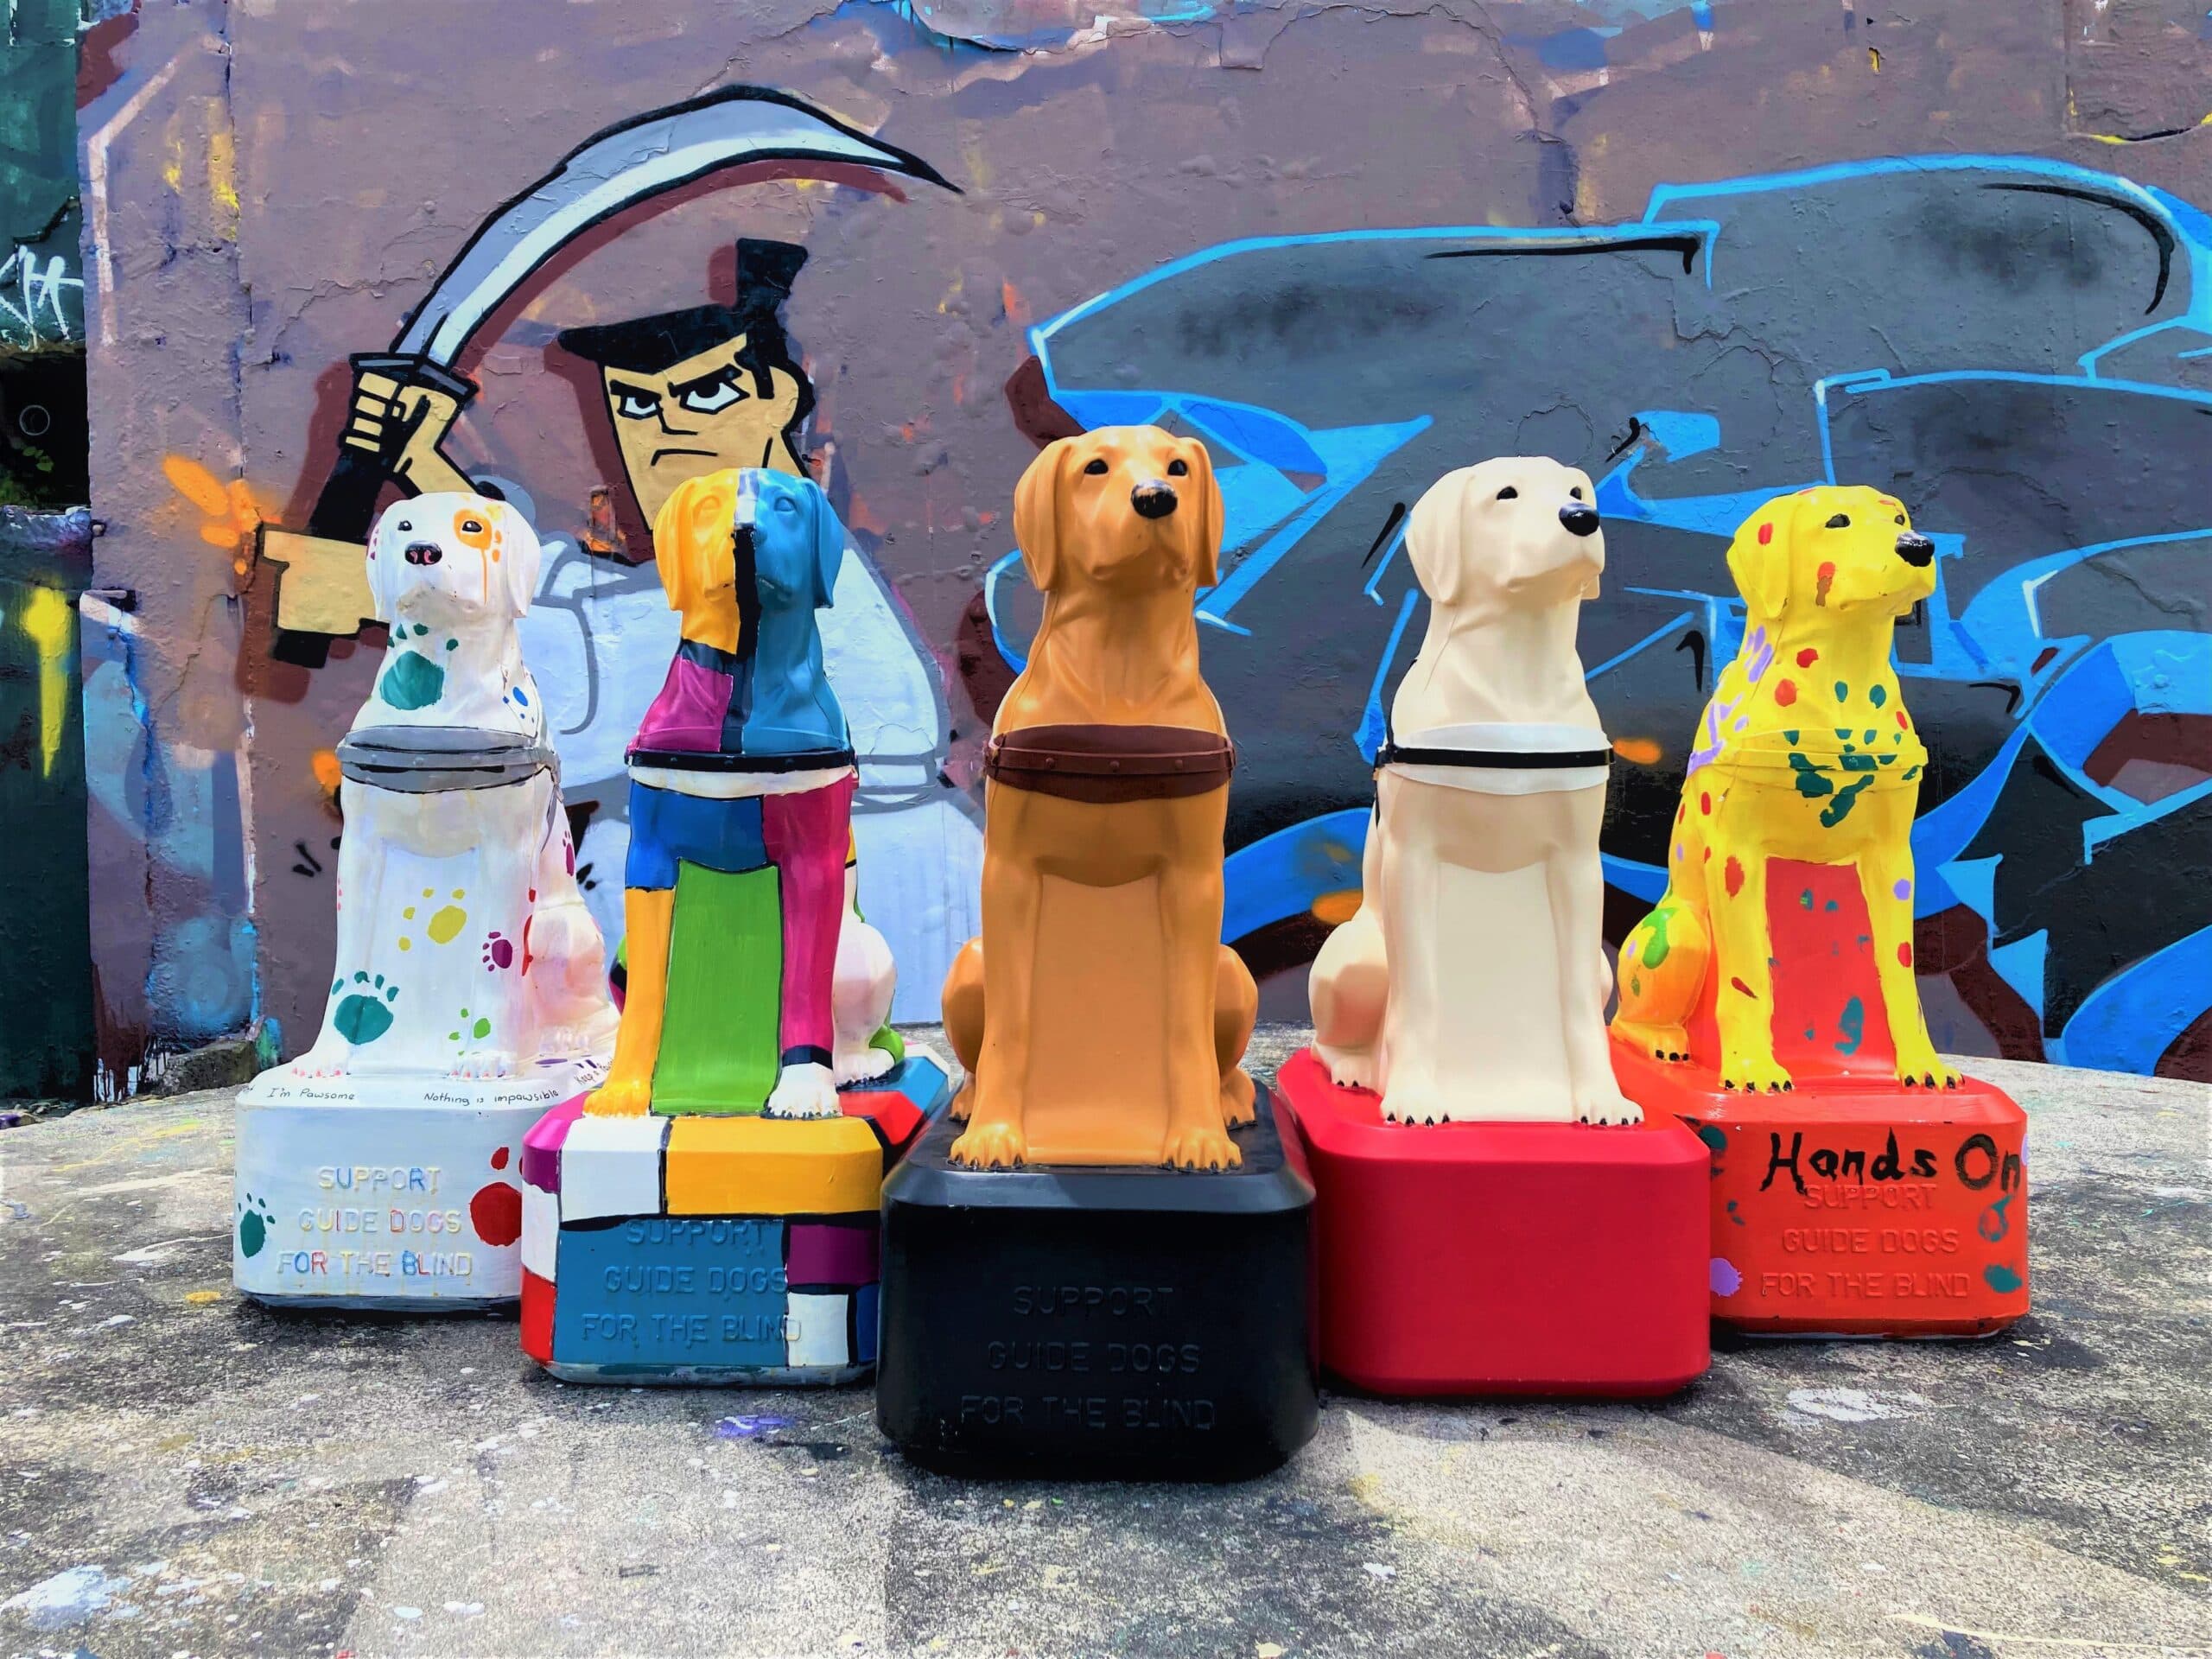 A group of life-sized dog-shaped collection boxes, Trudy Dogs, painted in bright colours, placed in front of an urban mural.